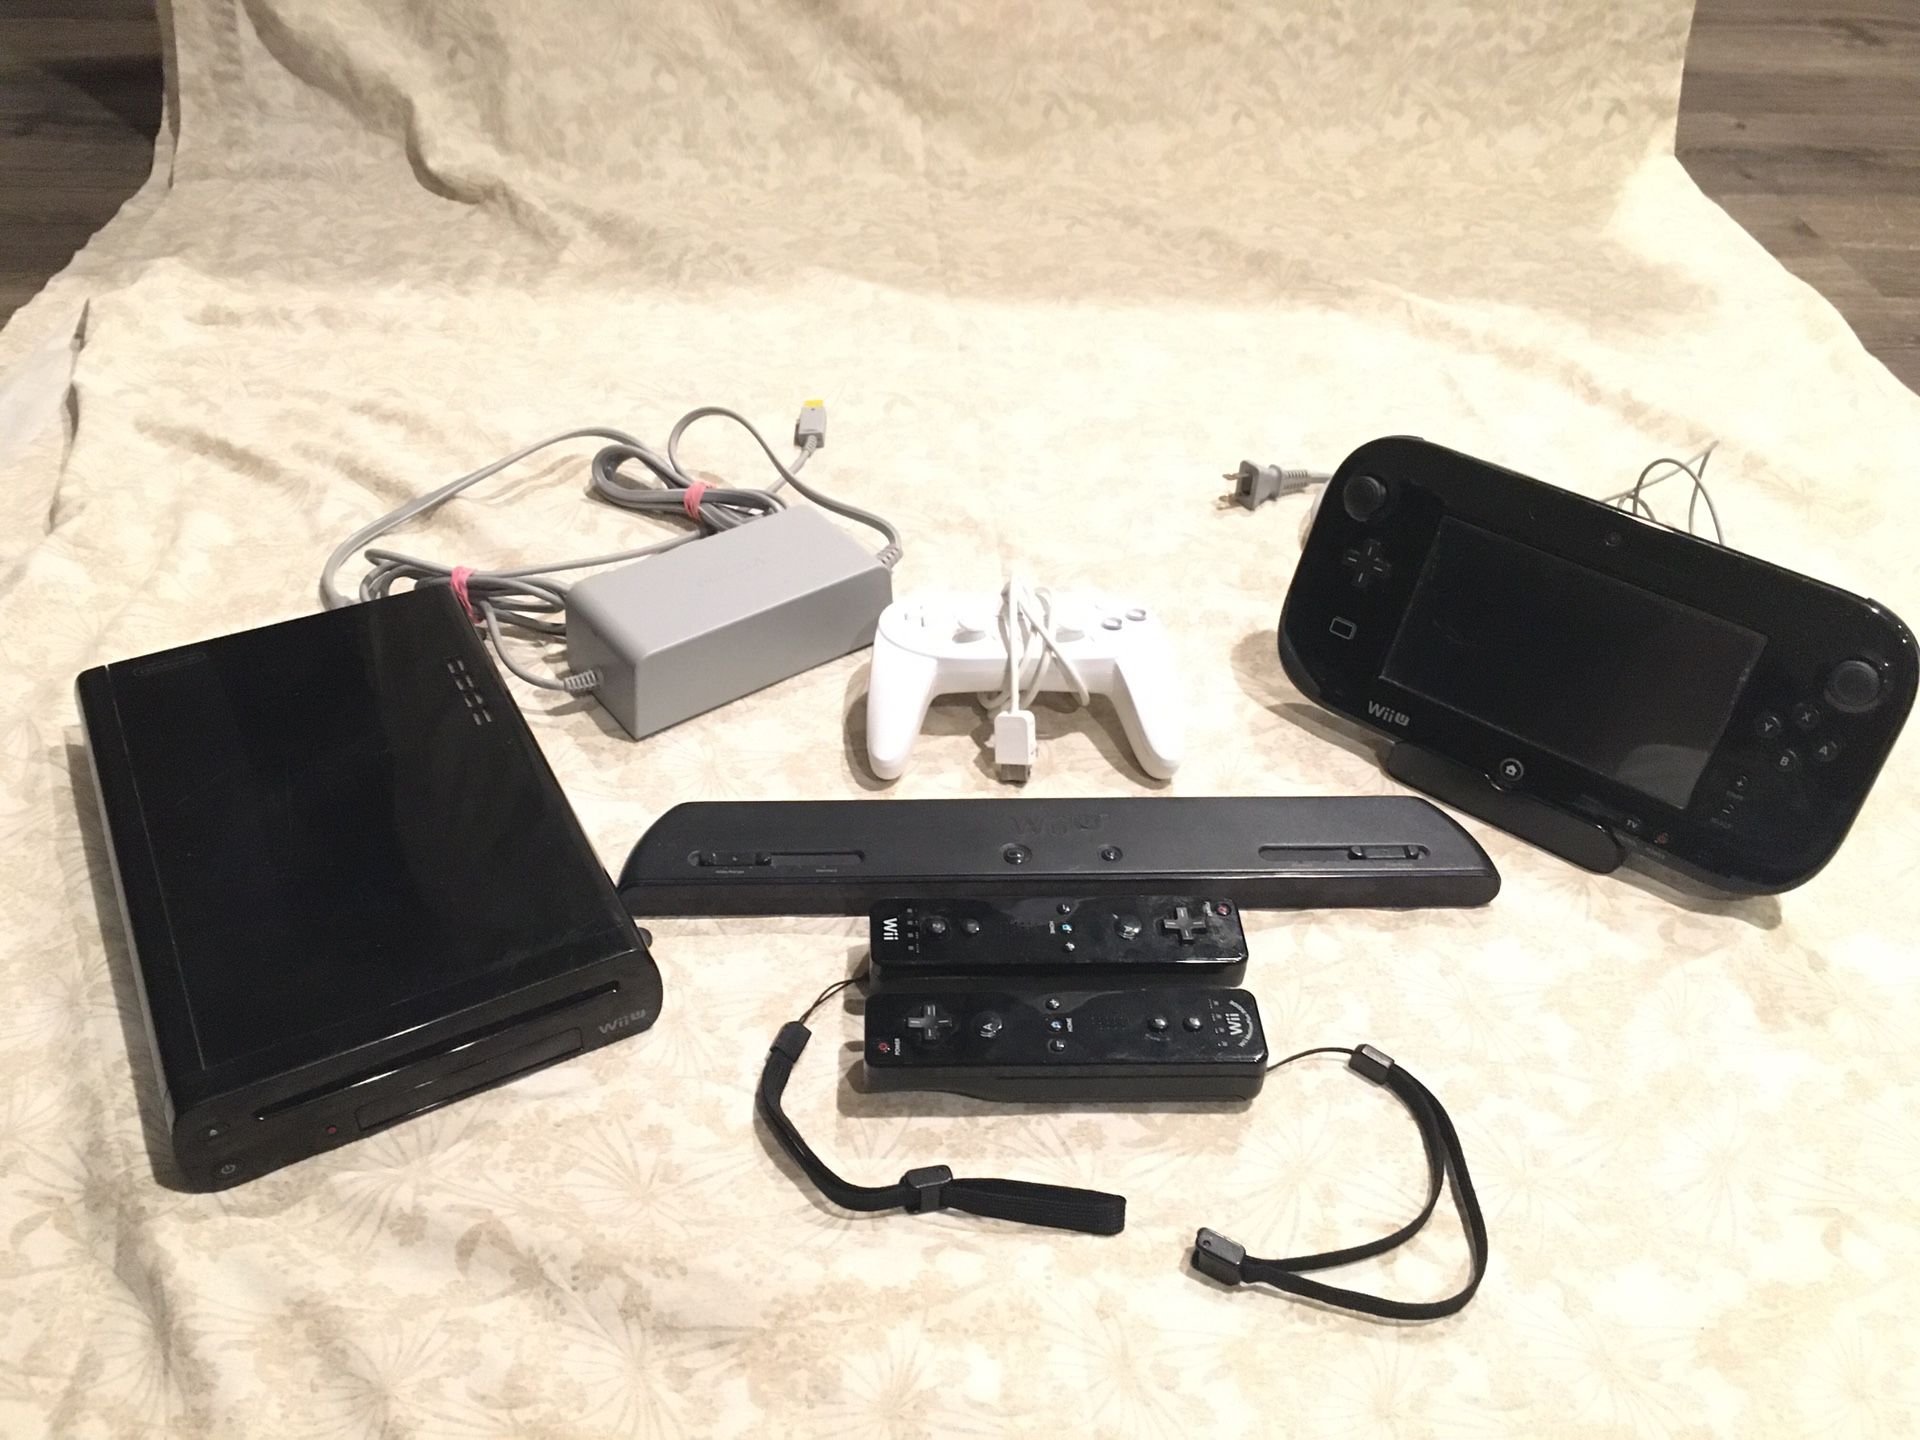 Nintendo Wii U console plus controller and games